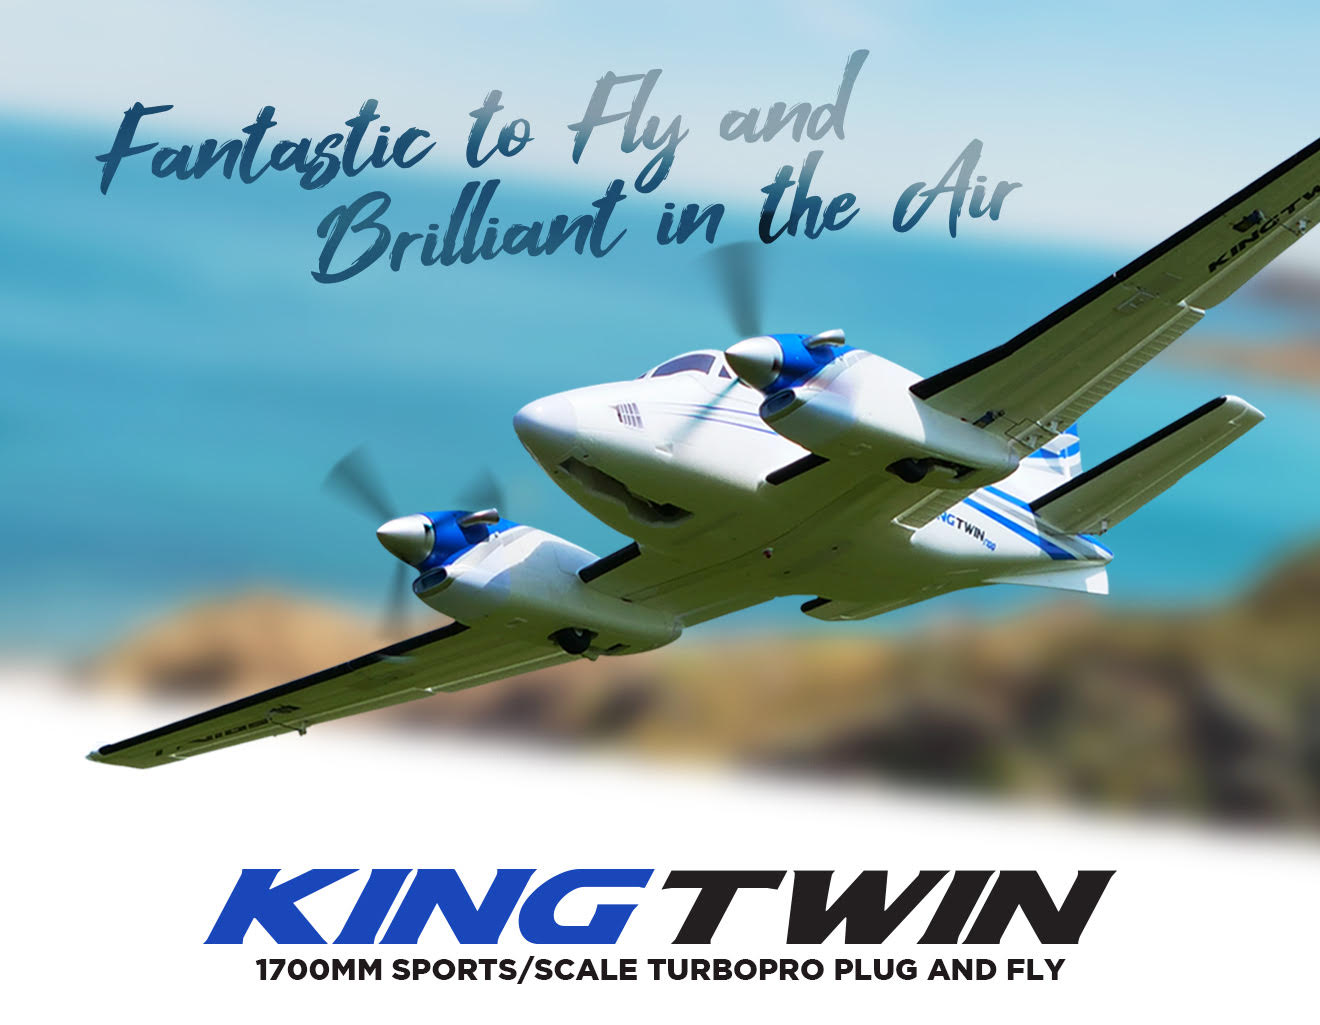 The Avios Kingtwin: Fantastic to Fly and Brilliant in the Air